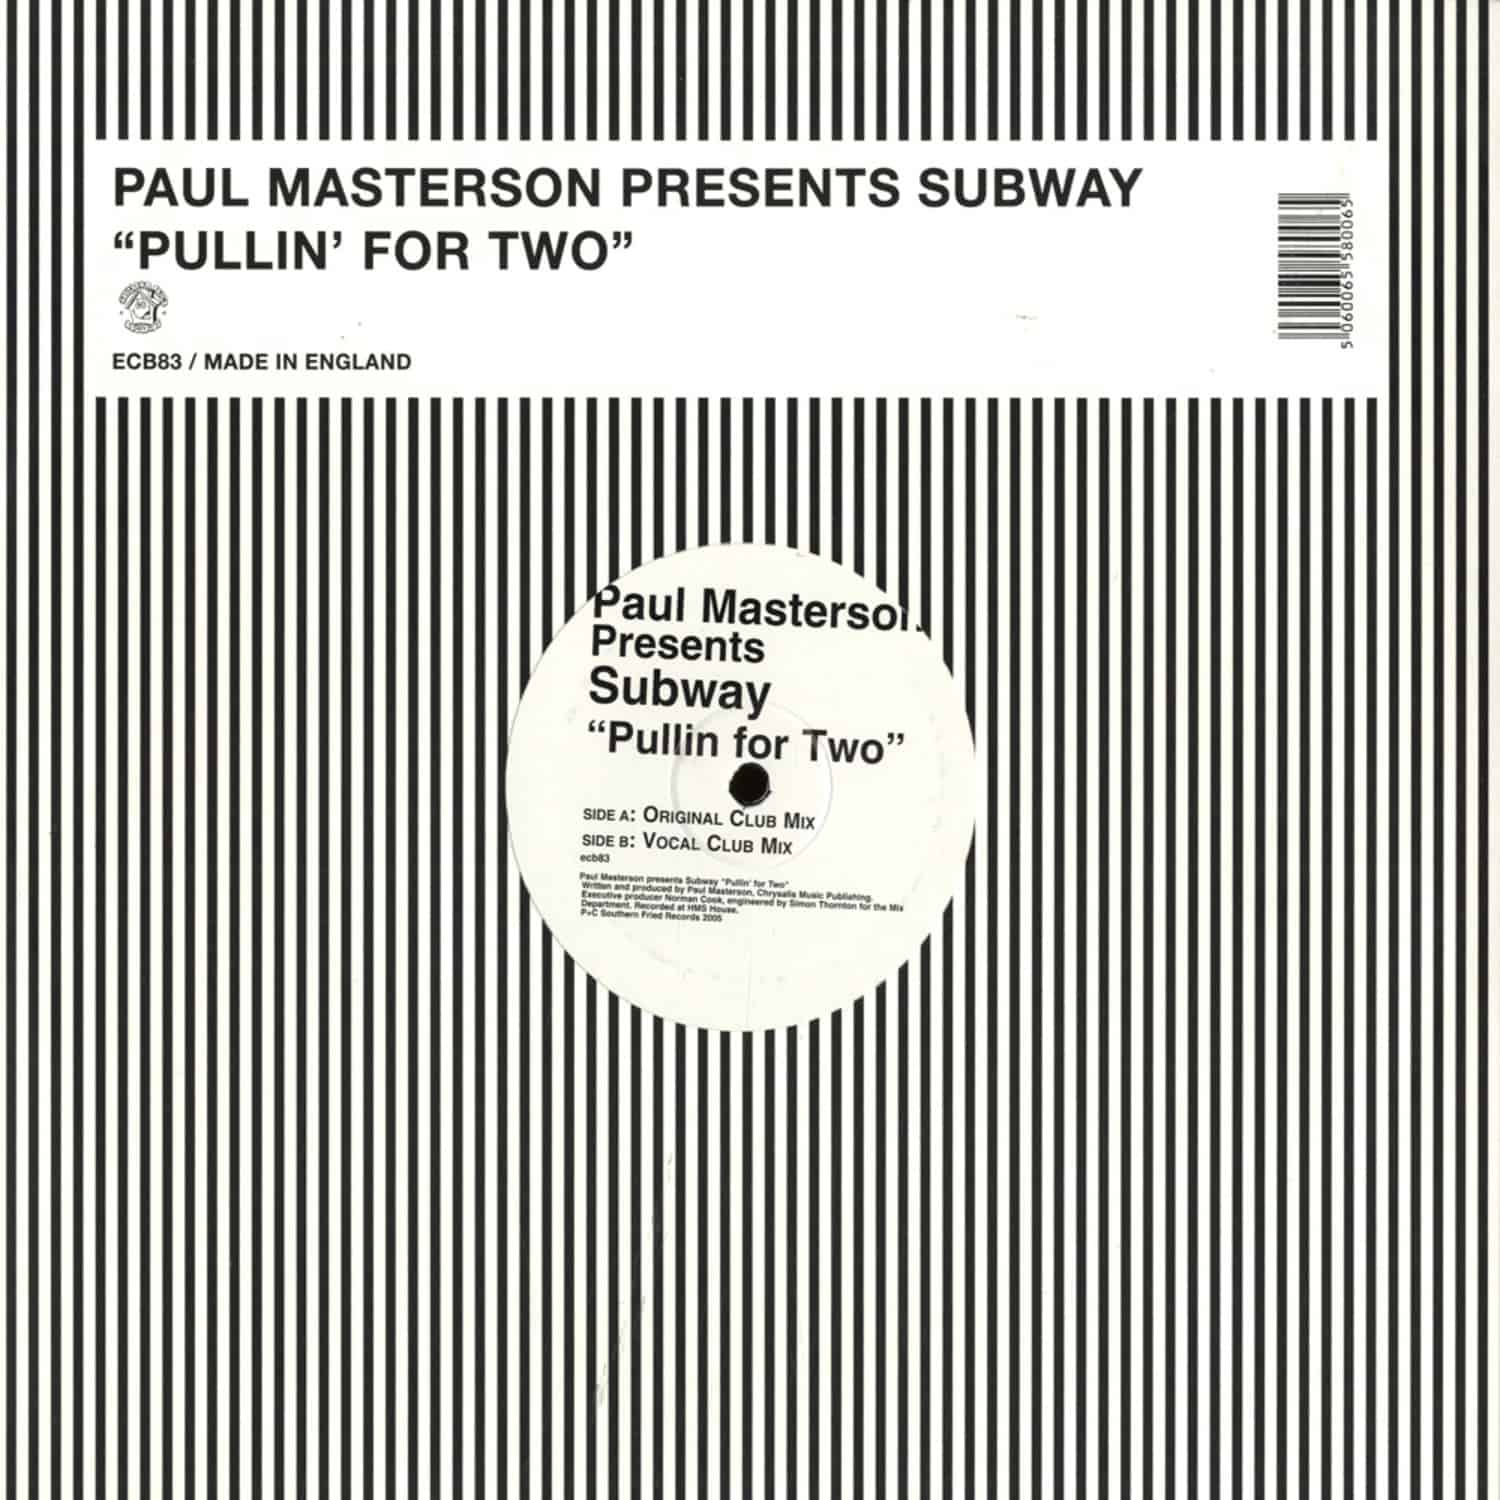 Paul Masterson presents Subway - PULLIN FOR TWO